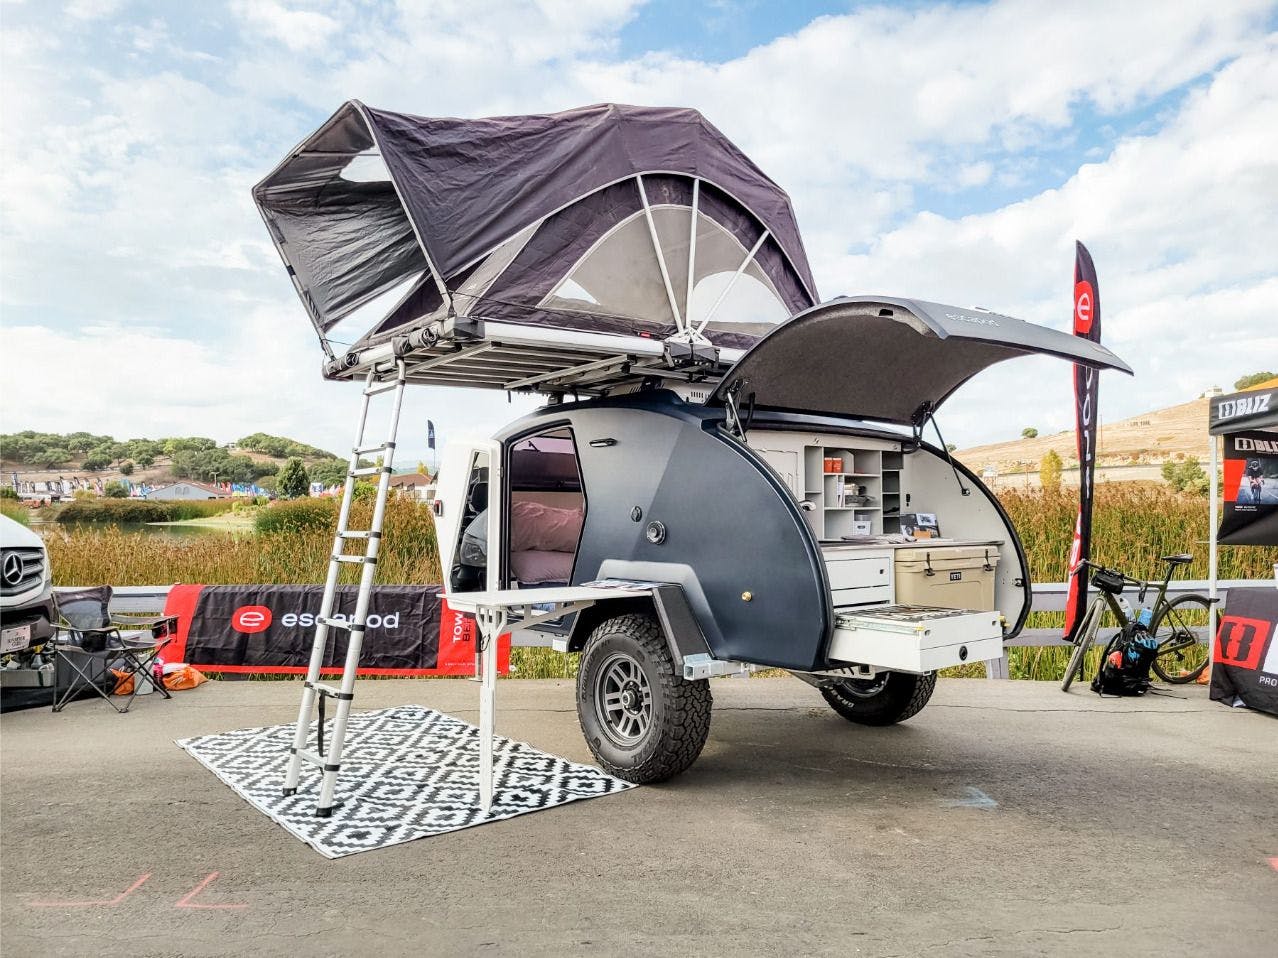 A teardrop trailer (TOPO2) on display at an Overlanding event in California.